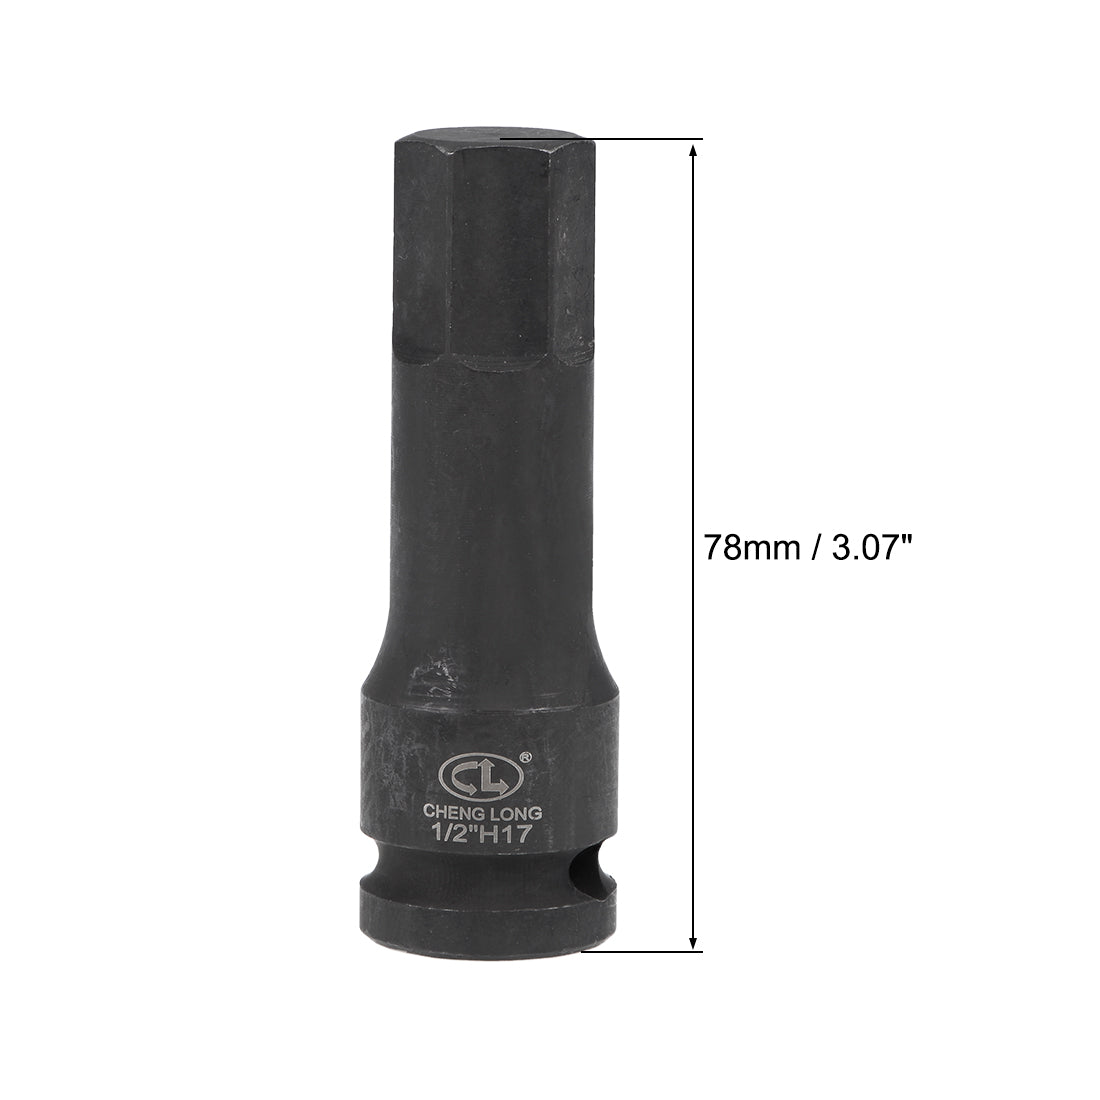 uxcell Uxcell Impact Hex Bit Socket, Metric Cr-Mo Steel